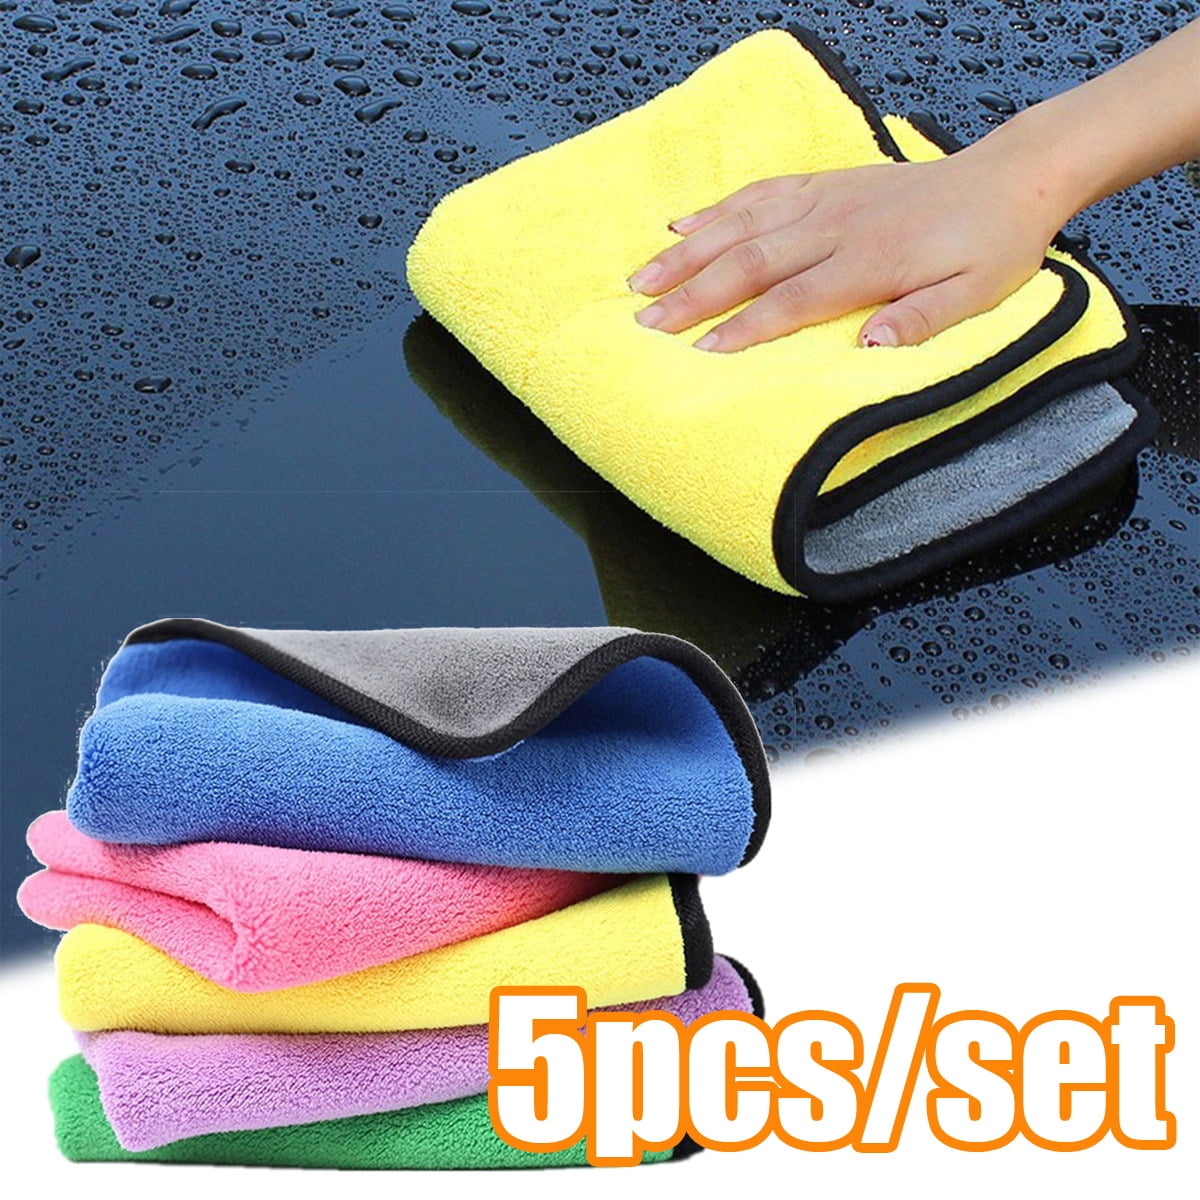 Cleaning Cloths-5pk,All-Purpose Softer Highly Absorbent,Lint Free-Streak  Free Wash Cloth for House,Car,Pet,Window,Gift,Floor,Machine,etc,Kitchen  Towel,Car Cloth - China Daily Cleaning Wipes and Home Clean Towels price